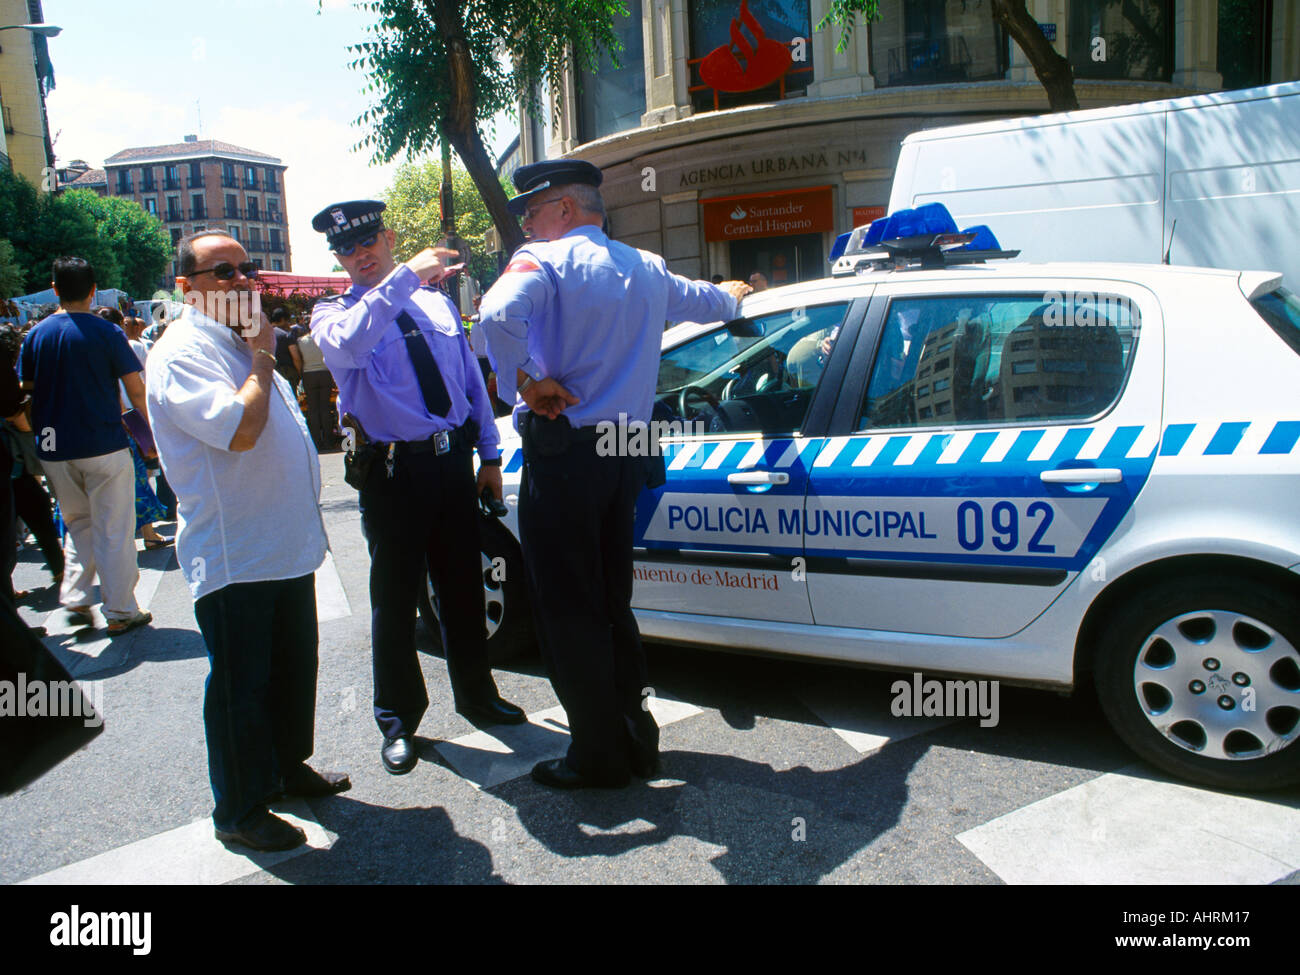 Madrid Spain Policeman Giving Directions to Man Standing Next to Police Car Stock Photo